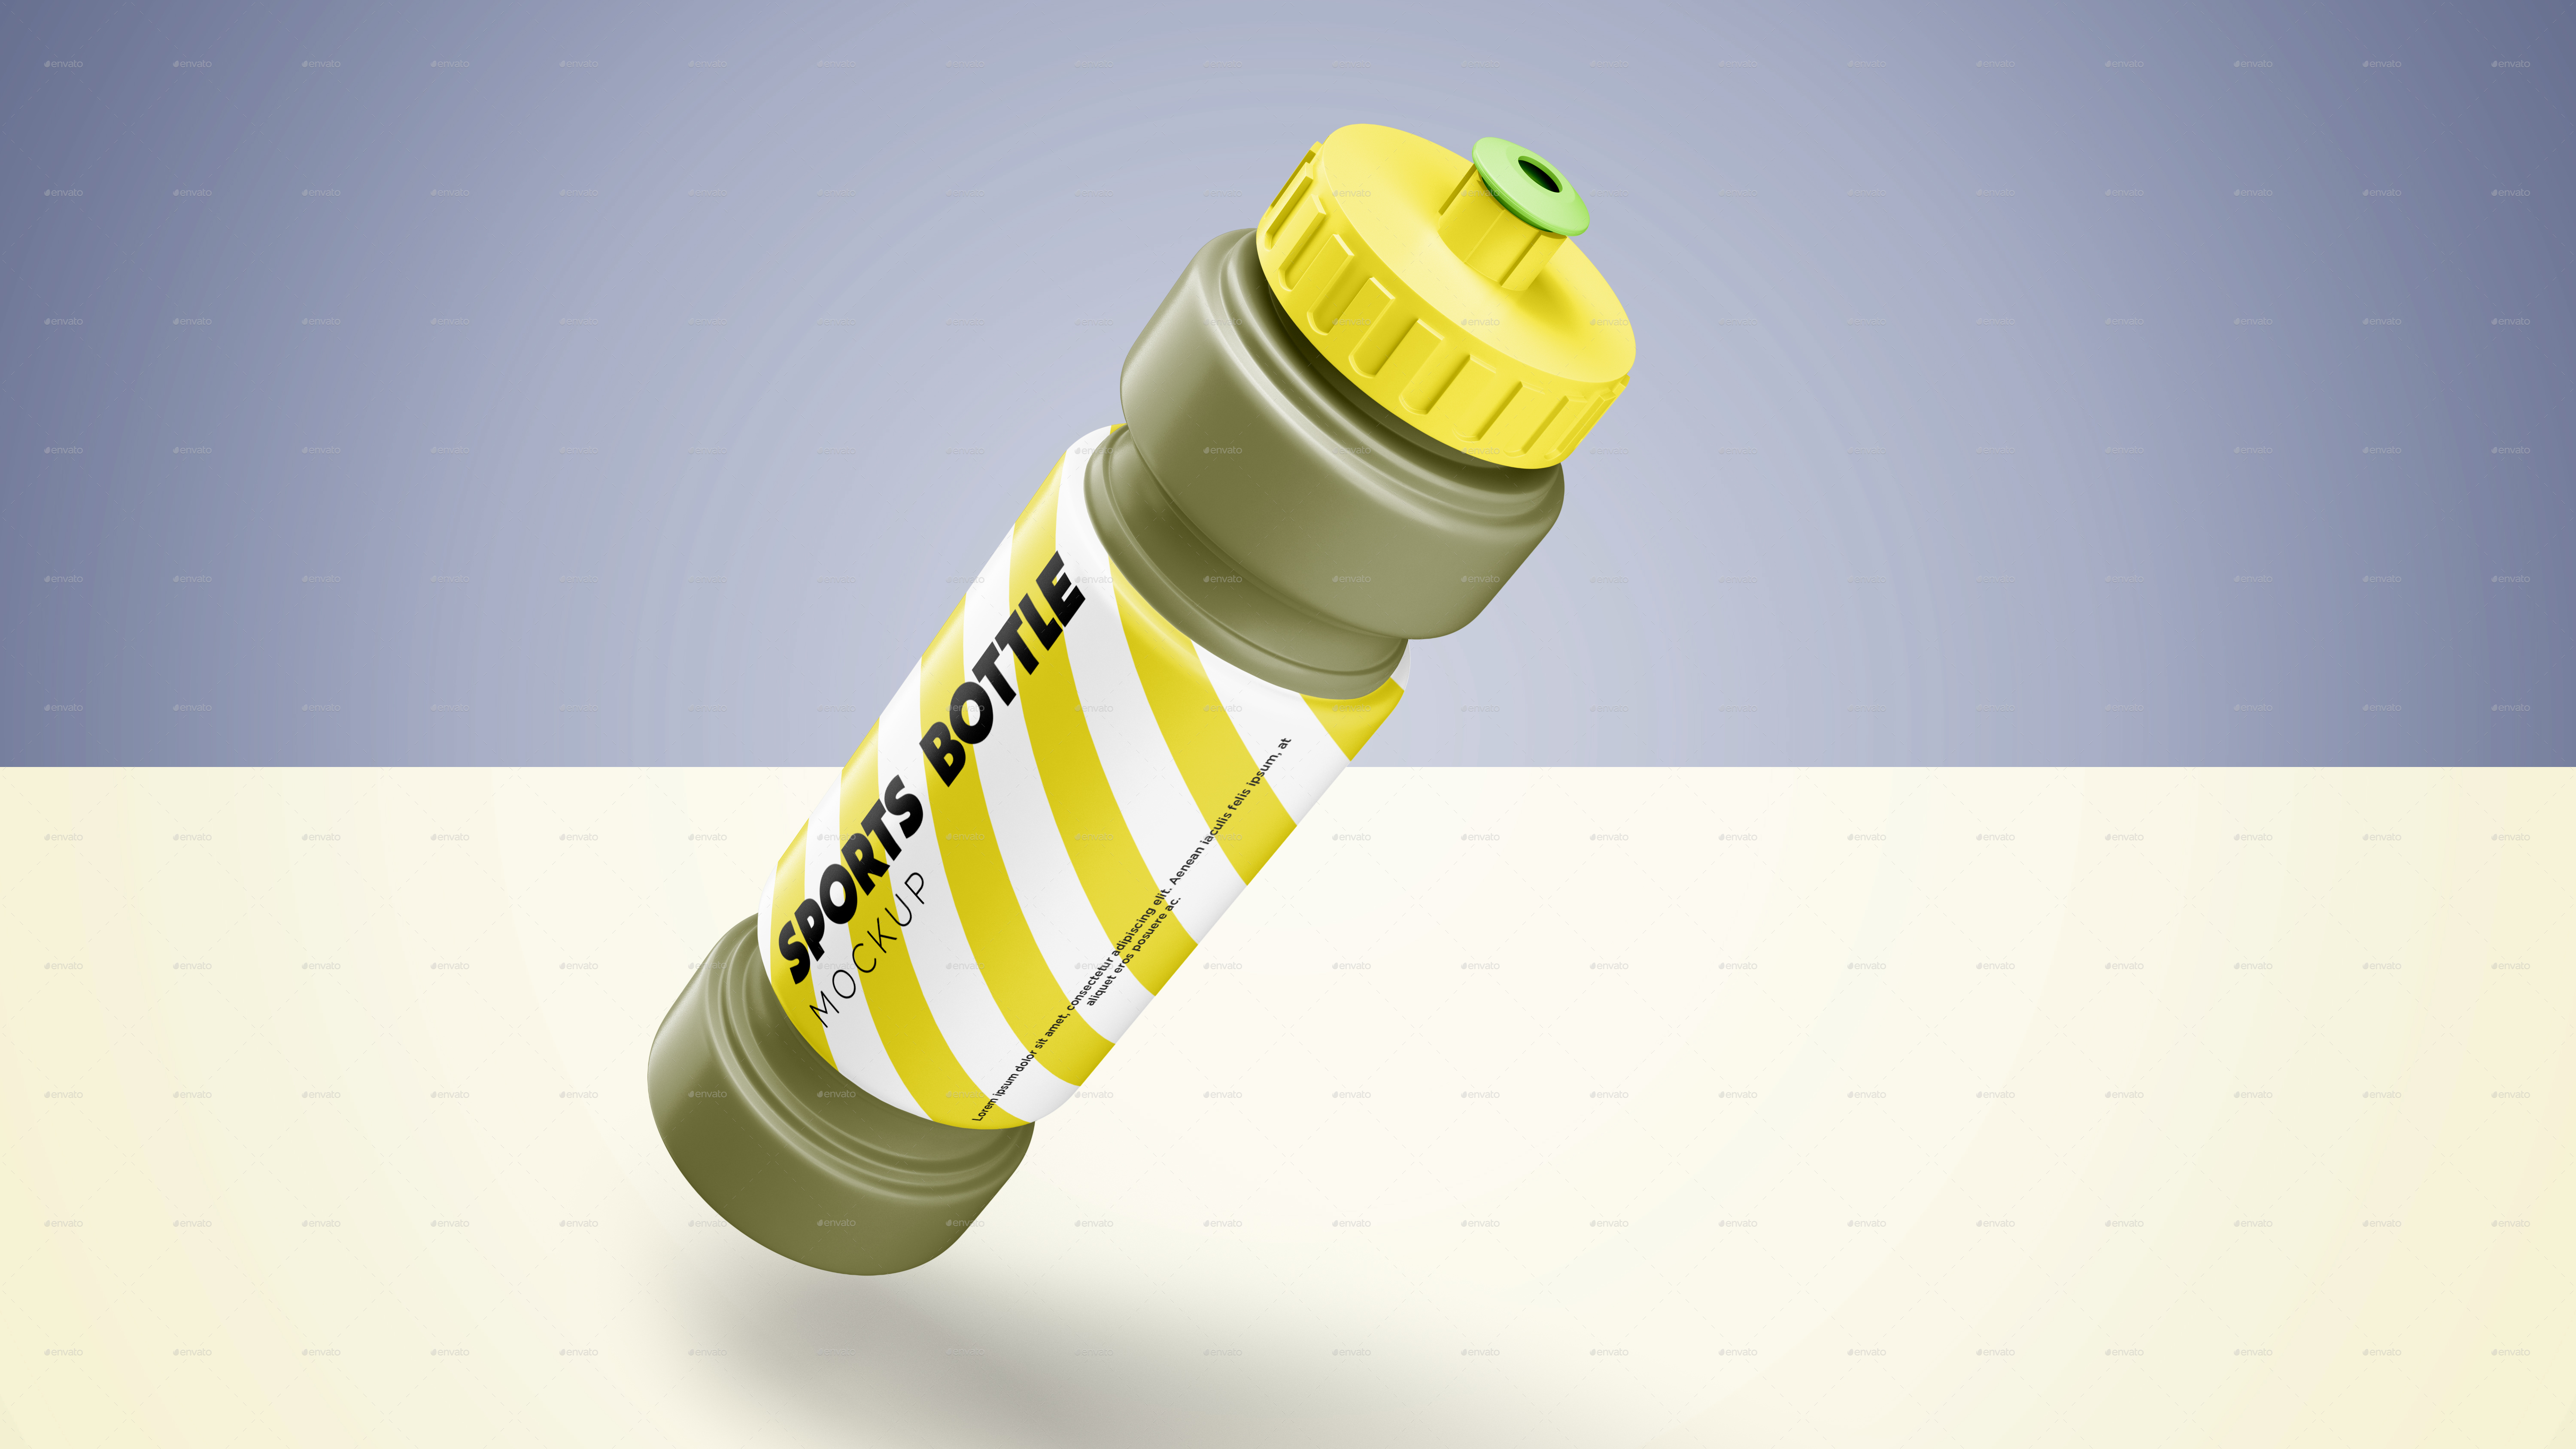 Download Sports Bottle Mockup by graphicdesigno | GraphicRiver